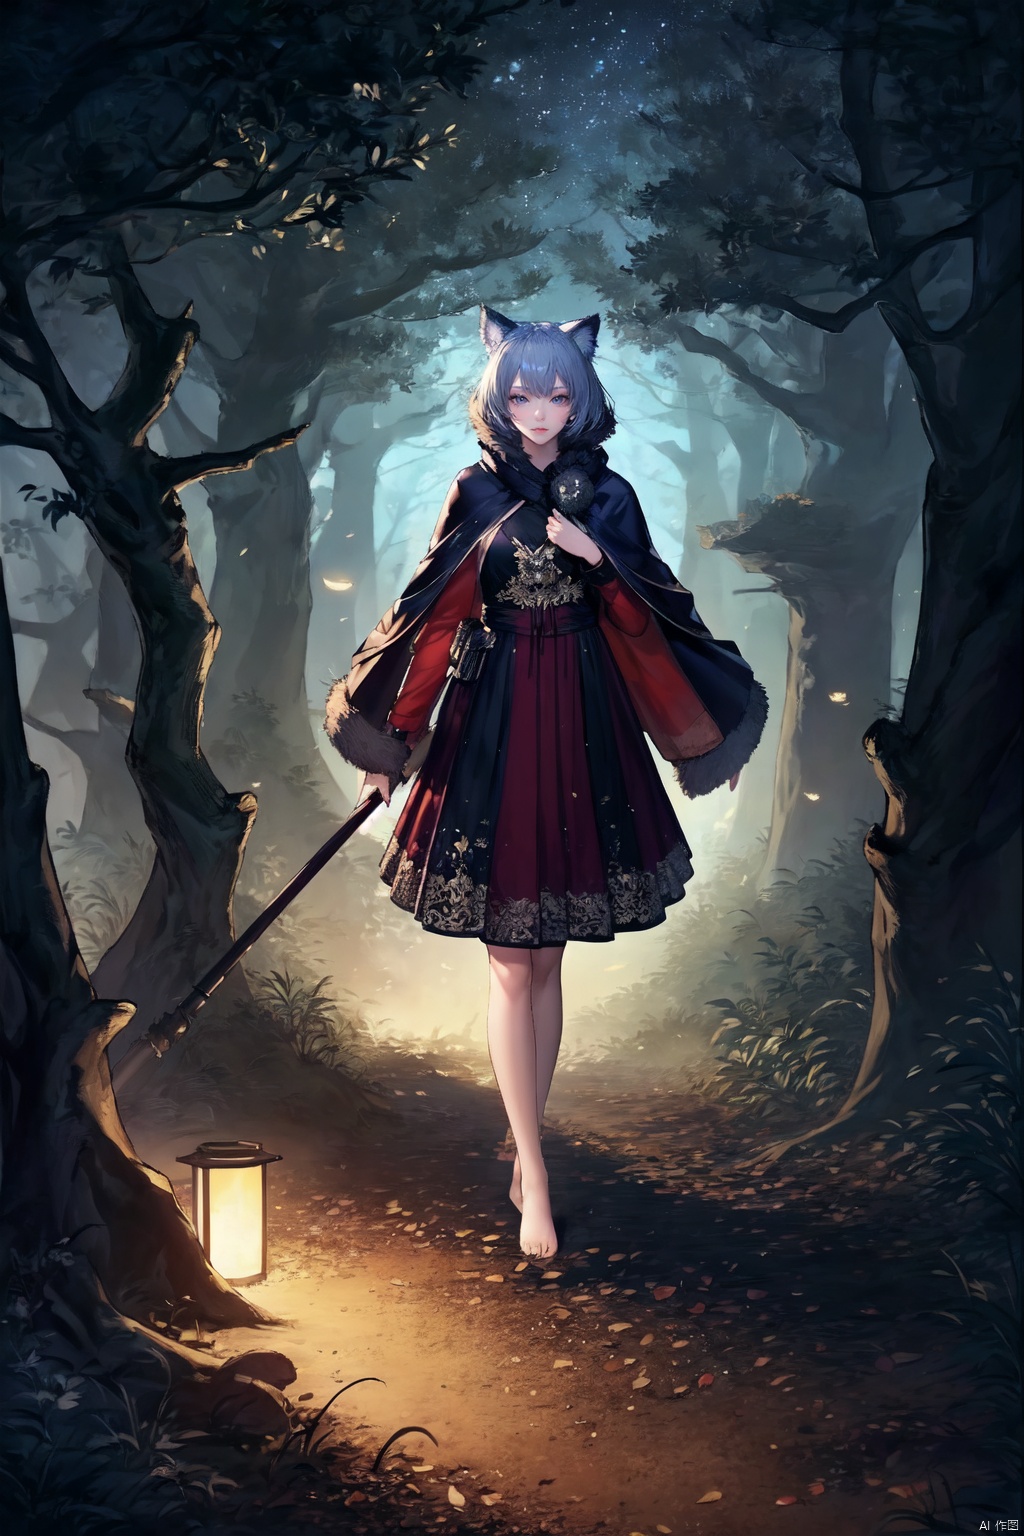  (8k, imaginative fantasy style, mystical quality), intricate detailing, (ethereal skin with subtle wolf-like features and luminescent eyes), 1wolf maiden, full-body transformation scene, wearing a shredded, leaf-patterned tunic revealing a blend of human and lupine traits, barefoot with claw-tipped toes, (transitional fur: blending from human to wolf, gradient effect), standing in the midst of a twisted, enchanted forest at midnight, crescent moon above casting an eerie glow, gnarled trees with glowing mushrooms, mist shrouding the foreground, ((poakl)), azur lane